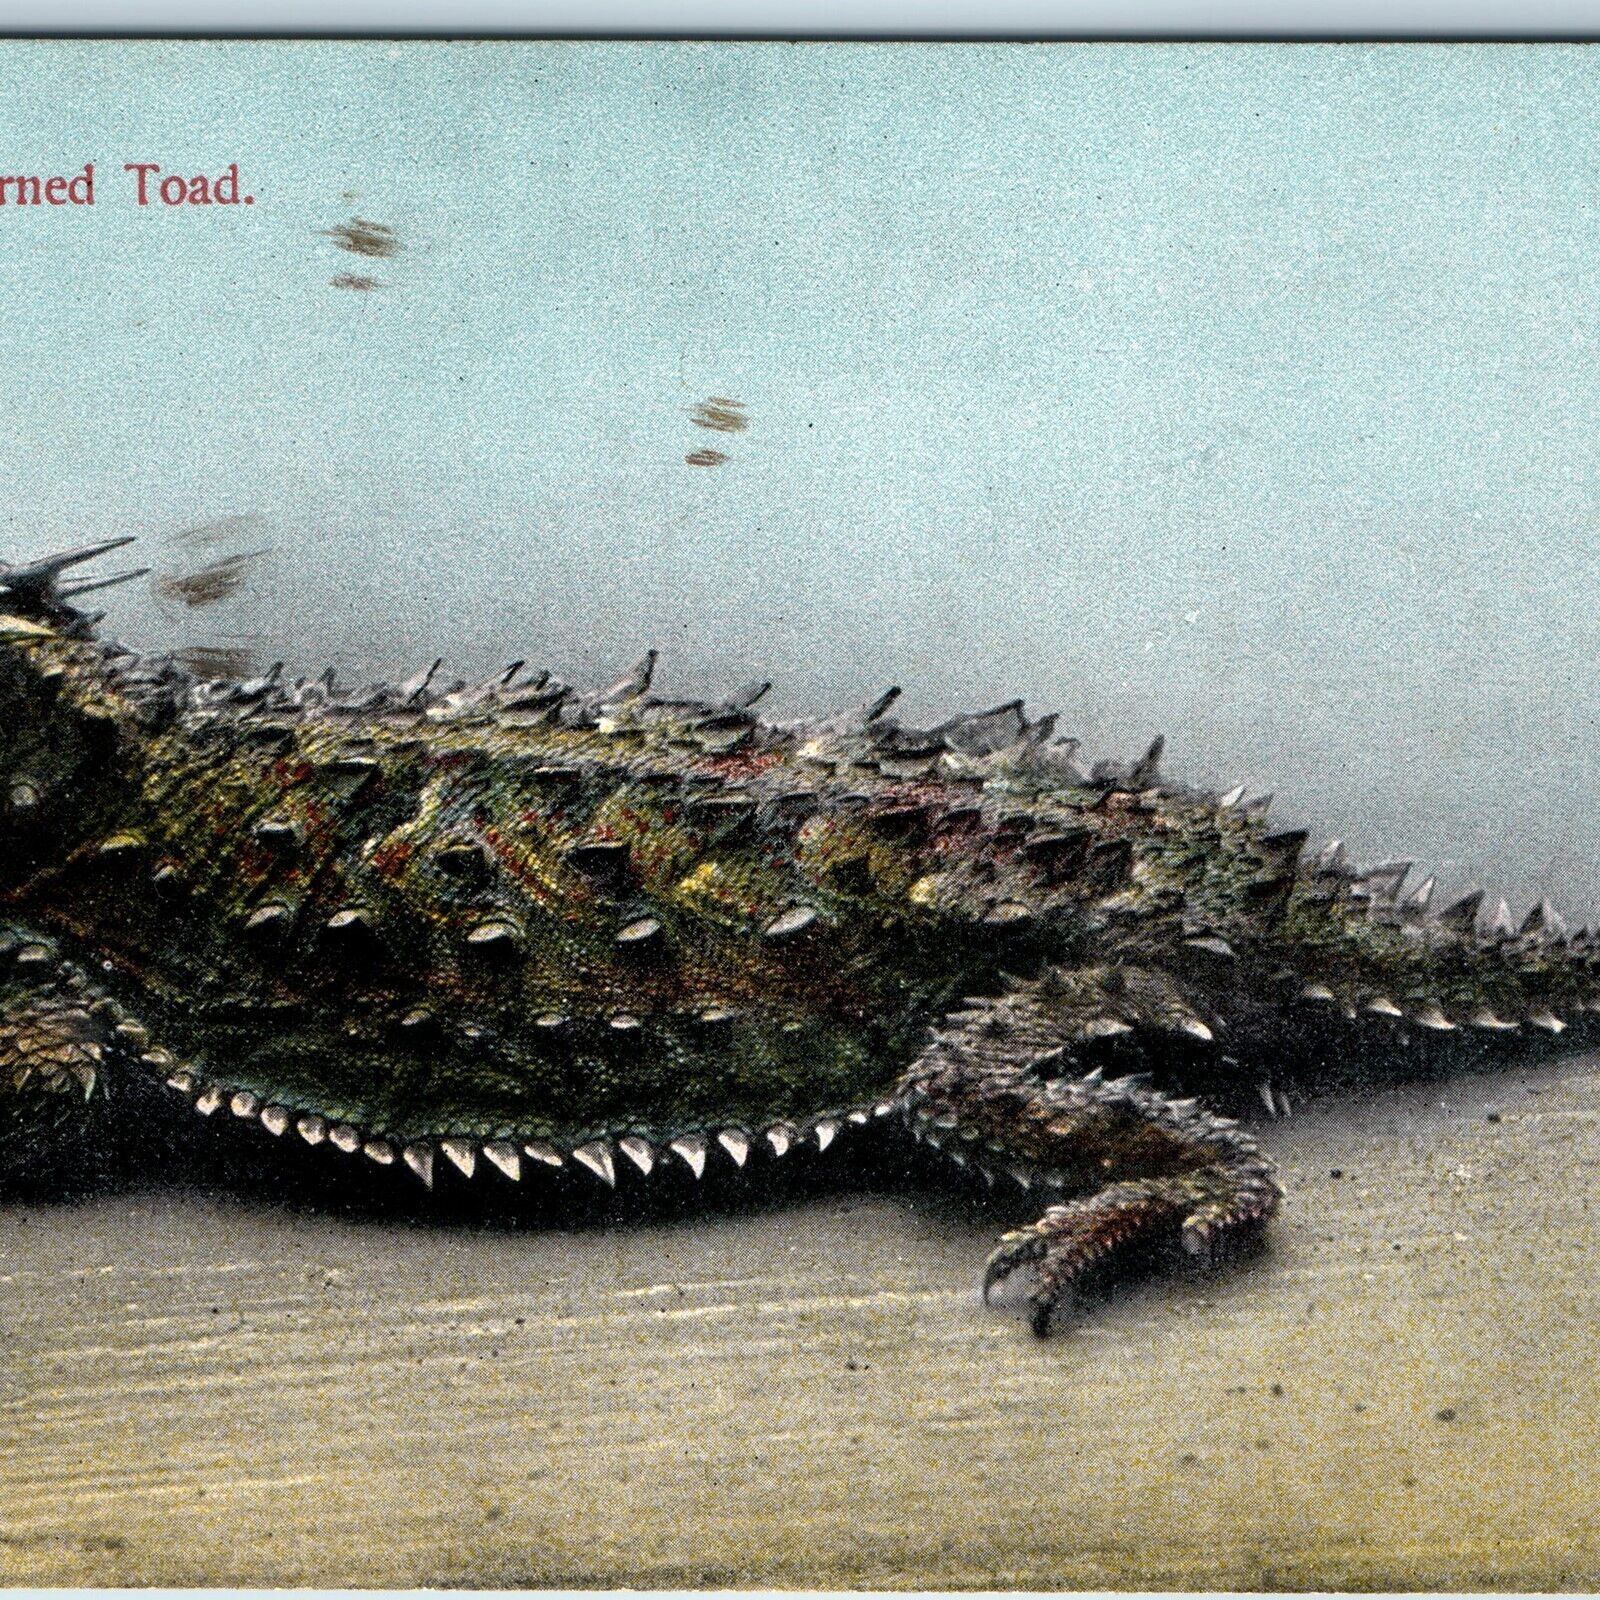 c1910s Horned Toad Antique Litho Photo Postcard Pub by M Rieder Los Angeles A215